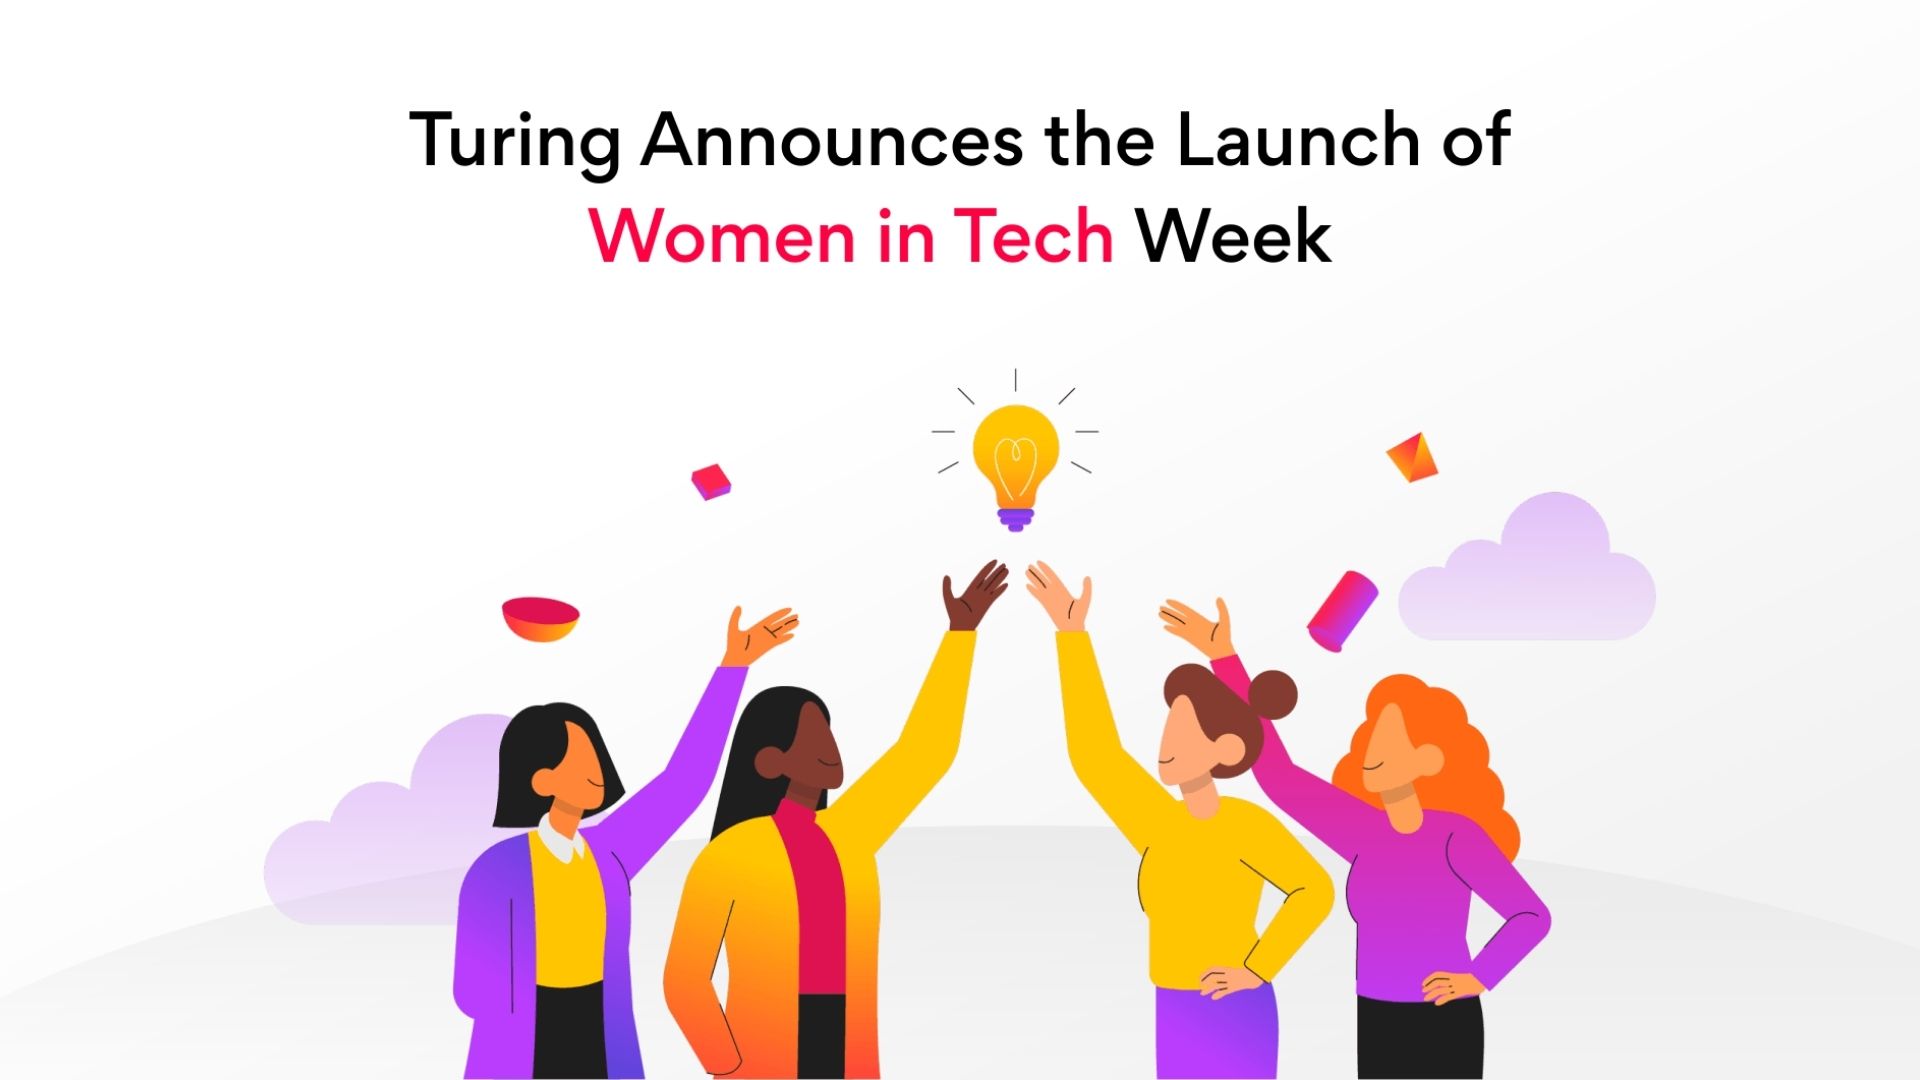 Turing.com Announces the Launch of Women in Tech Week 